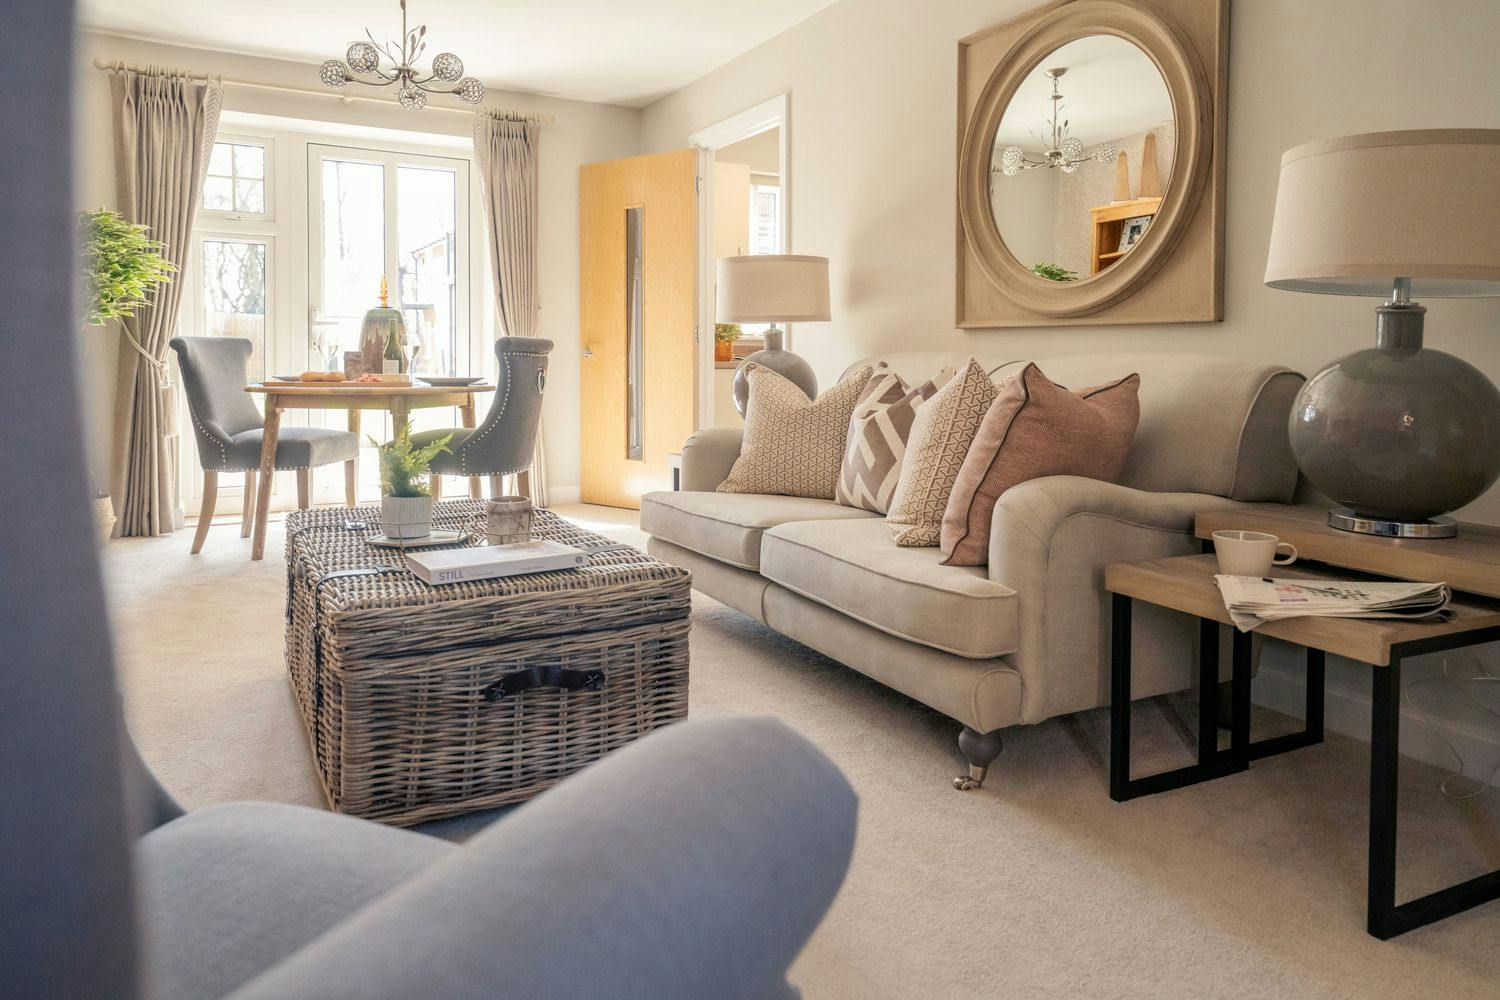 Living Room at Catherine Court Retirement Development in Eastleigh, Hampshire